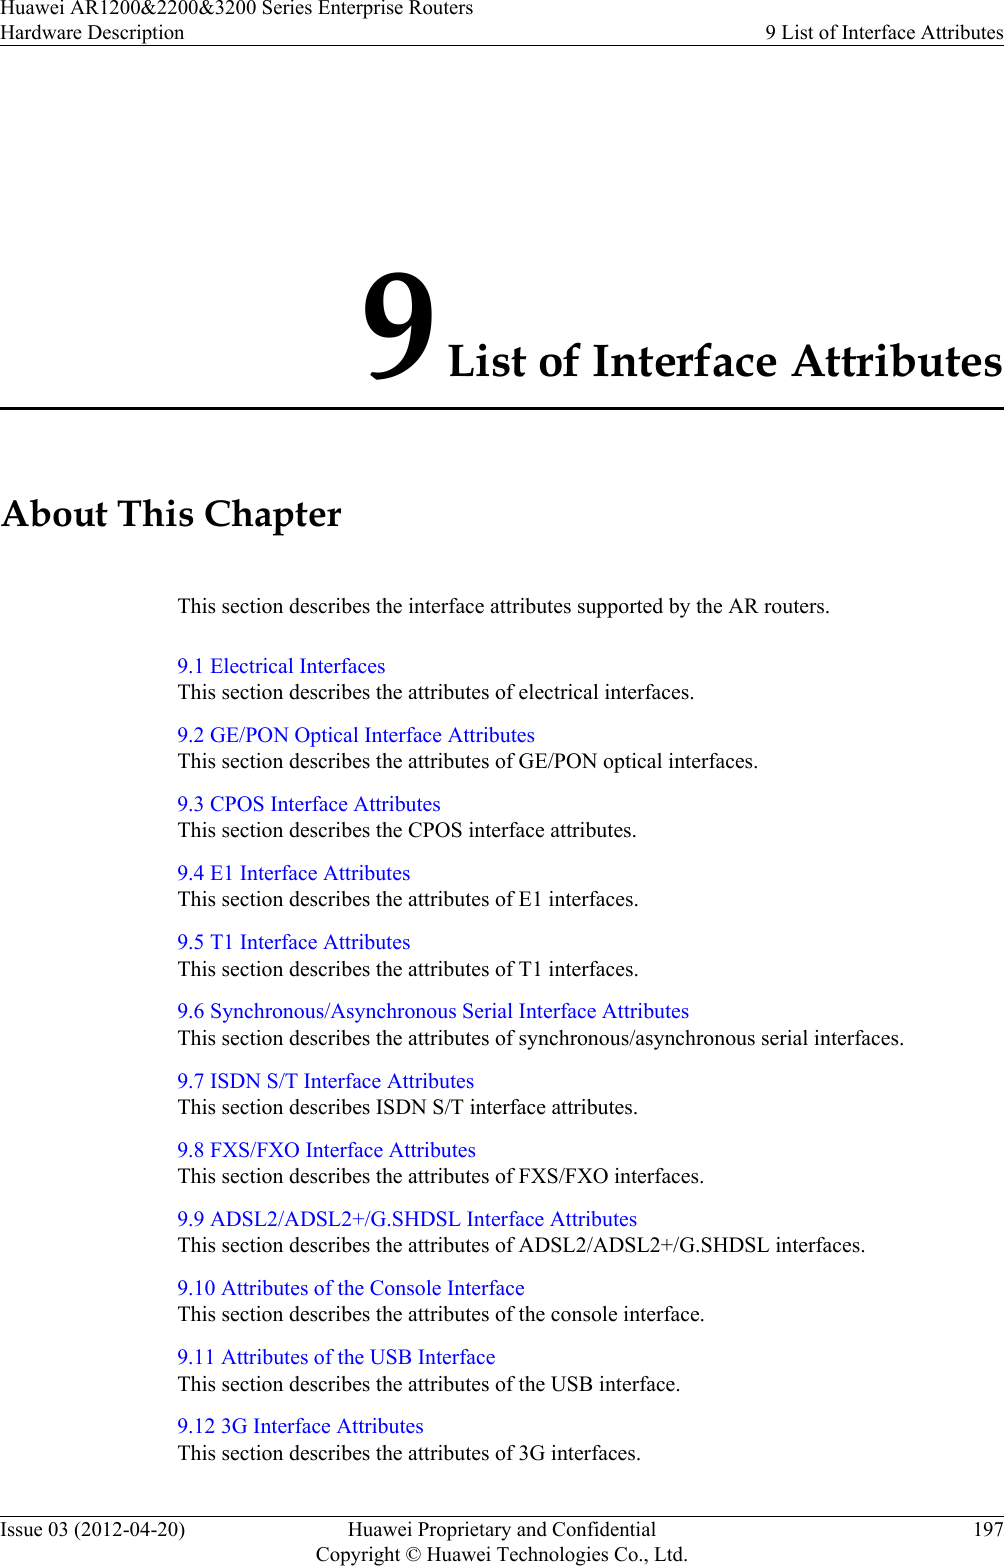 9 List of Interface AttributesAbout This ChapterThis section describes the interface attributes supported by the AR routers.9.1 Electrical InterfacesThis section describes the attributes of electrical interfaces.9.2 GE/PON Optical Interface AttributesThis section describes the attributes of GE/PON optical interfaces.9.3 CPOS Interface AttributesThis section describes the CPOS interface attributes.9.4 E1 Interface AttributesThis section describes the attributes of E1 interfaces.9.5 T1 Interface AttributesThis section describes the attributes of T1 interfaces.9.6 Synchronous/Asynchronous Serial Interface AttributesThis section describes the attributes of synchronous/asynchronous serial interfaces.9.7 ISDN S/T Interface AttributesThis section describes ISDN S/T interface attributes.9.8 FXS/FXO Interface AttributesThis section describes the attributes of FXS/FXO interfaces.9.9 ADSL2/ADSL2+/G.SHDSL Interface AttributesThis section describes the attributes of ADSL2/ADSL2+/G.SHDSL interfaces.9.10 Attributes of the Console InterfaceThis section describes the attributes of the console interface.9.11 Attributes of the USB InterfaceThis section describes the attributes of the USB interface.9.12 3G Interface AttributesThis section describes the attributes of 3G interfaces.Huawei AR1200&amp;2200&amp;3200 Series Enterprise RoutersHardware Description 9 List of Interface AttributesIssue 03 (2012-04-20) Huawei Proprietary and ConfidentialCopyright © Huawei Technologies Co., Ltd.197